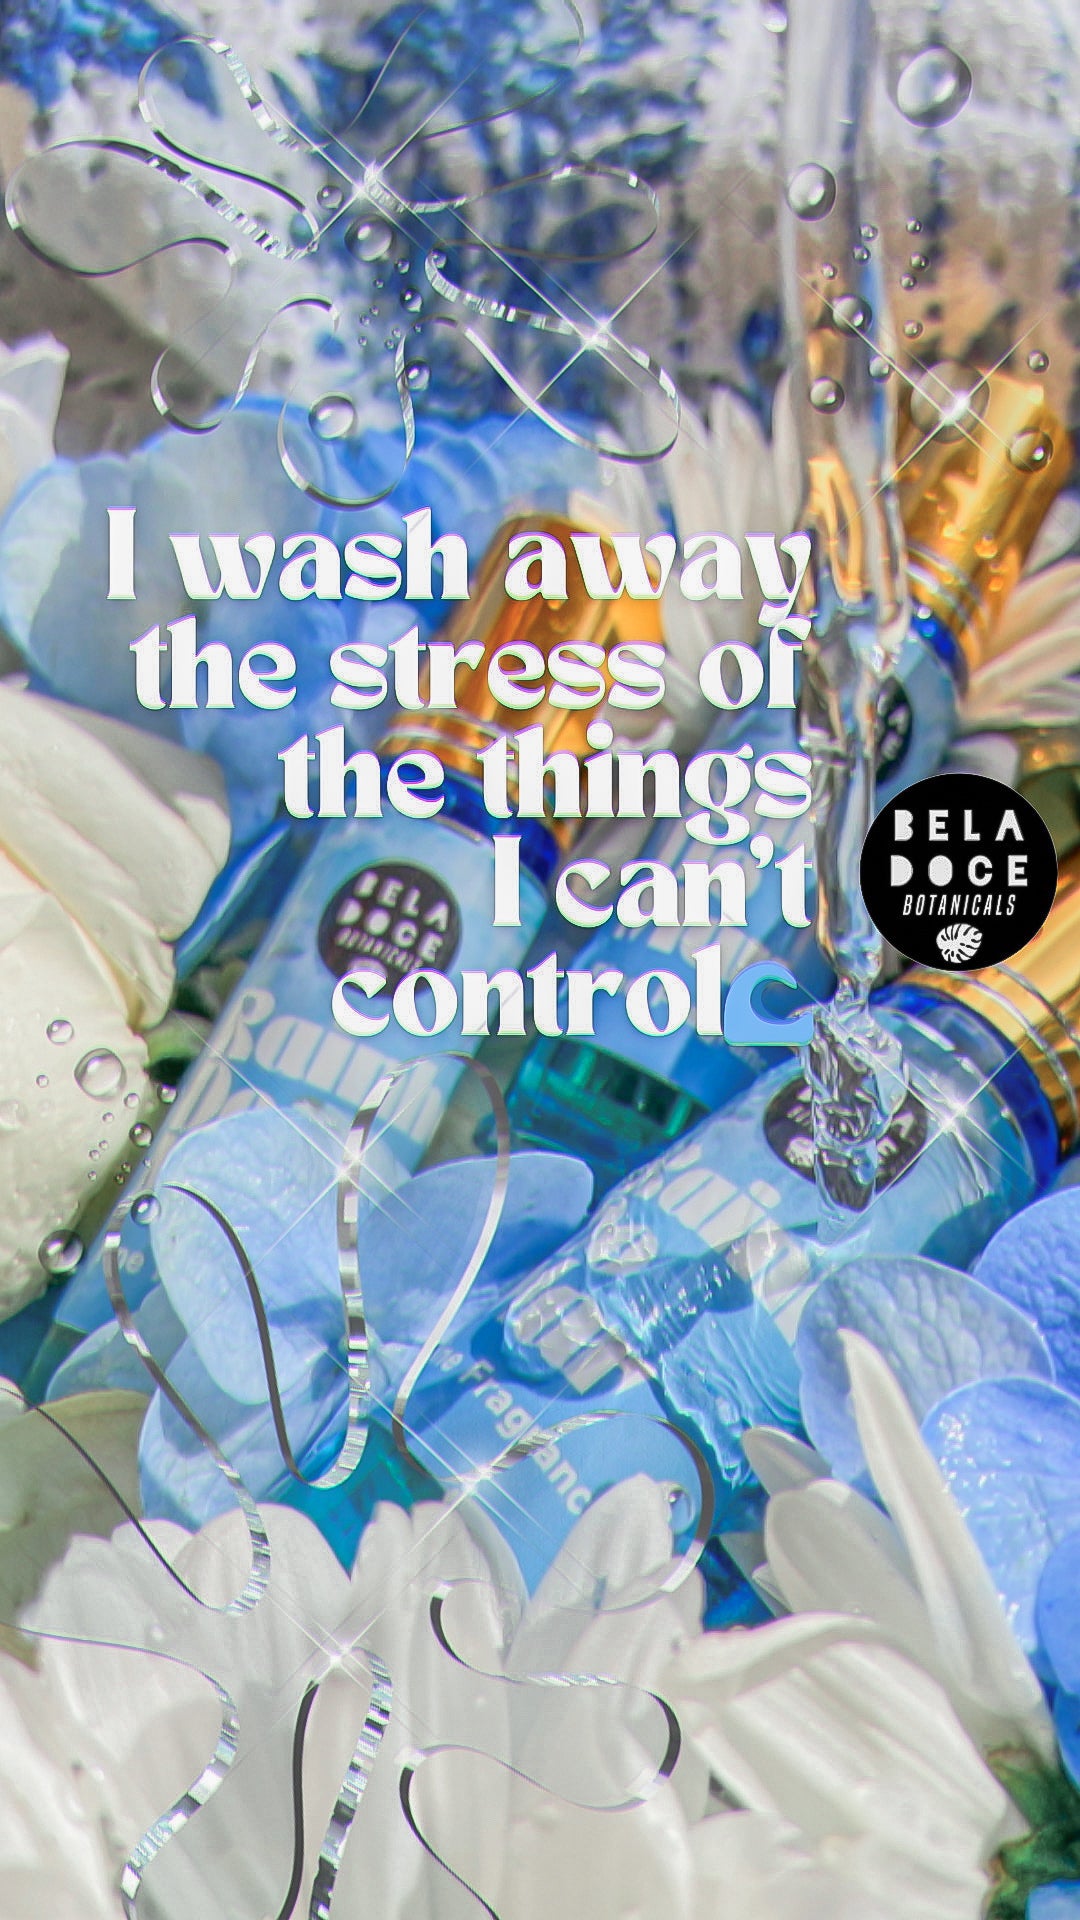 I was away the stress of things I can't control. image description: a stream of crystal clear water pouring onto 3 roller bottles of beladoce botanicals rainha do mar perfume, laying on a bed of flowers